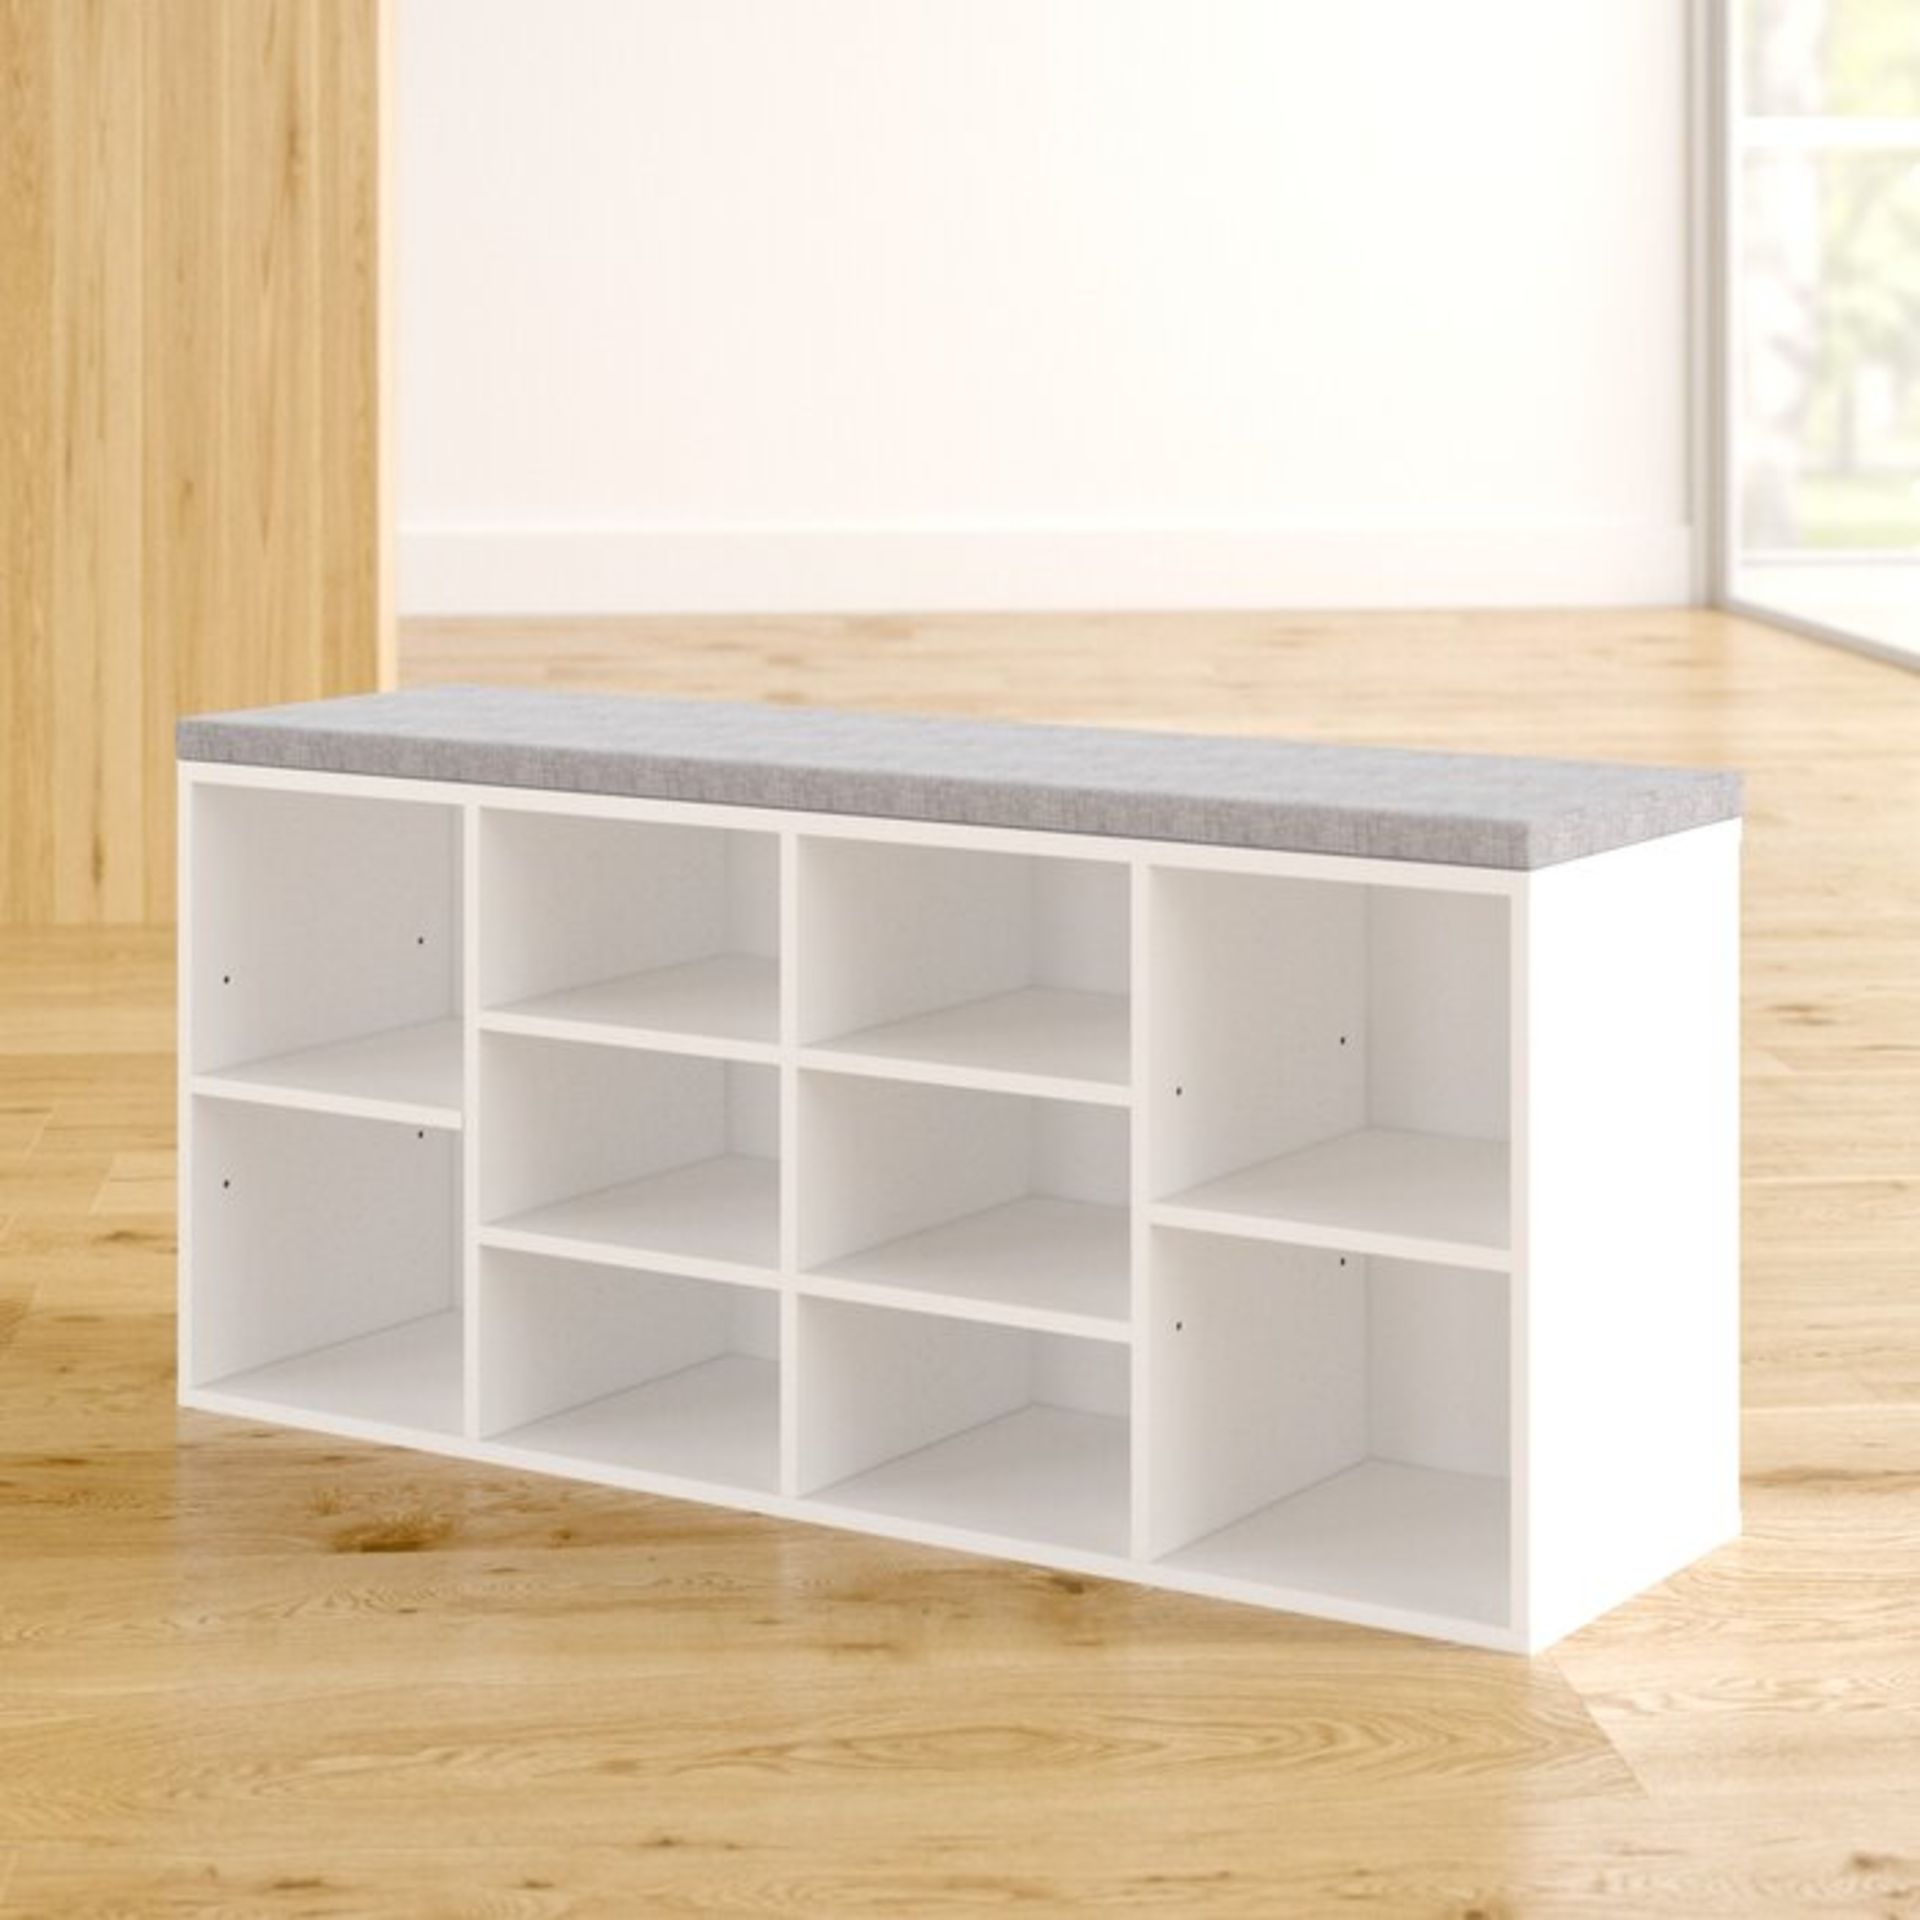 Shoes Storage Bench - RRP £65.99